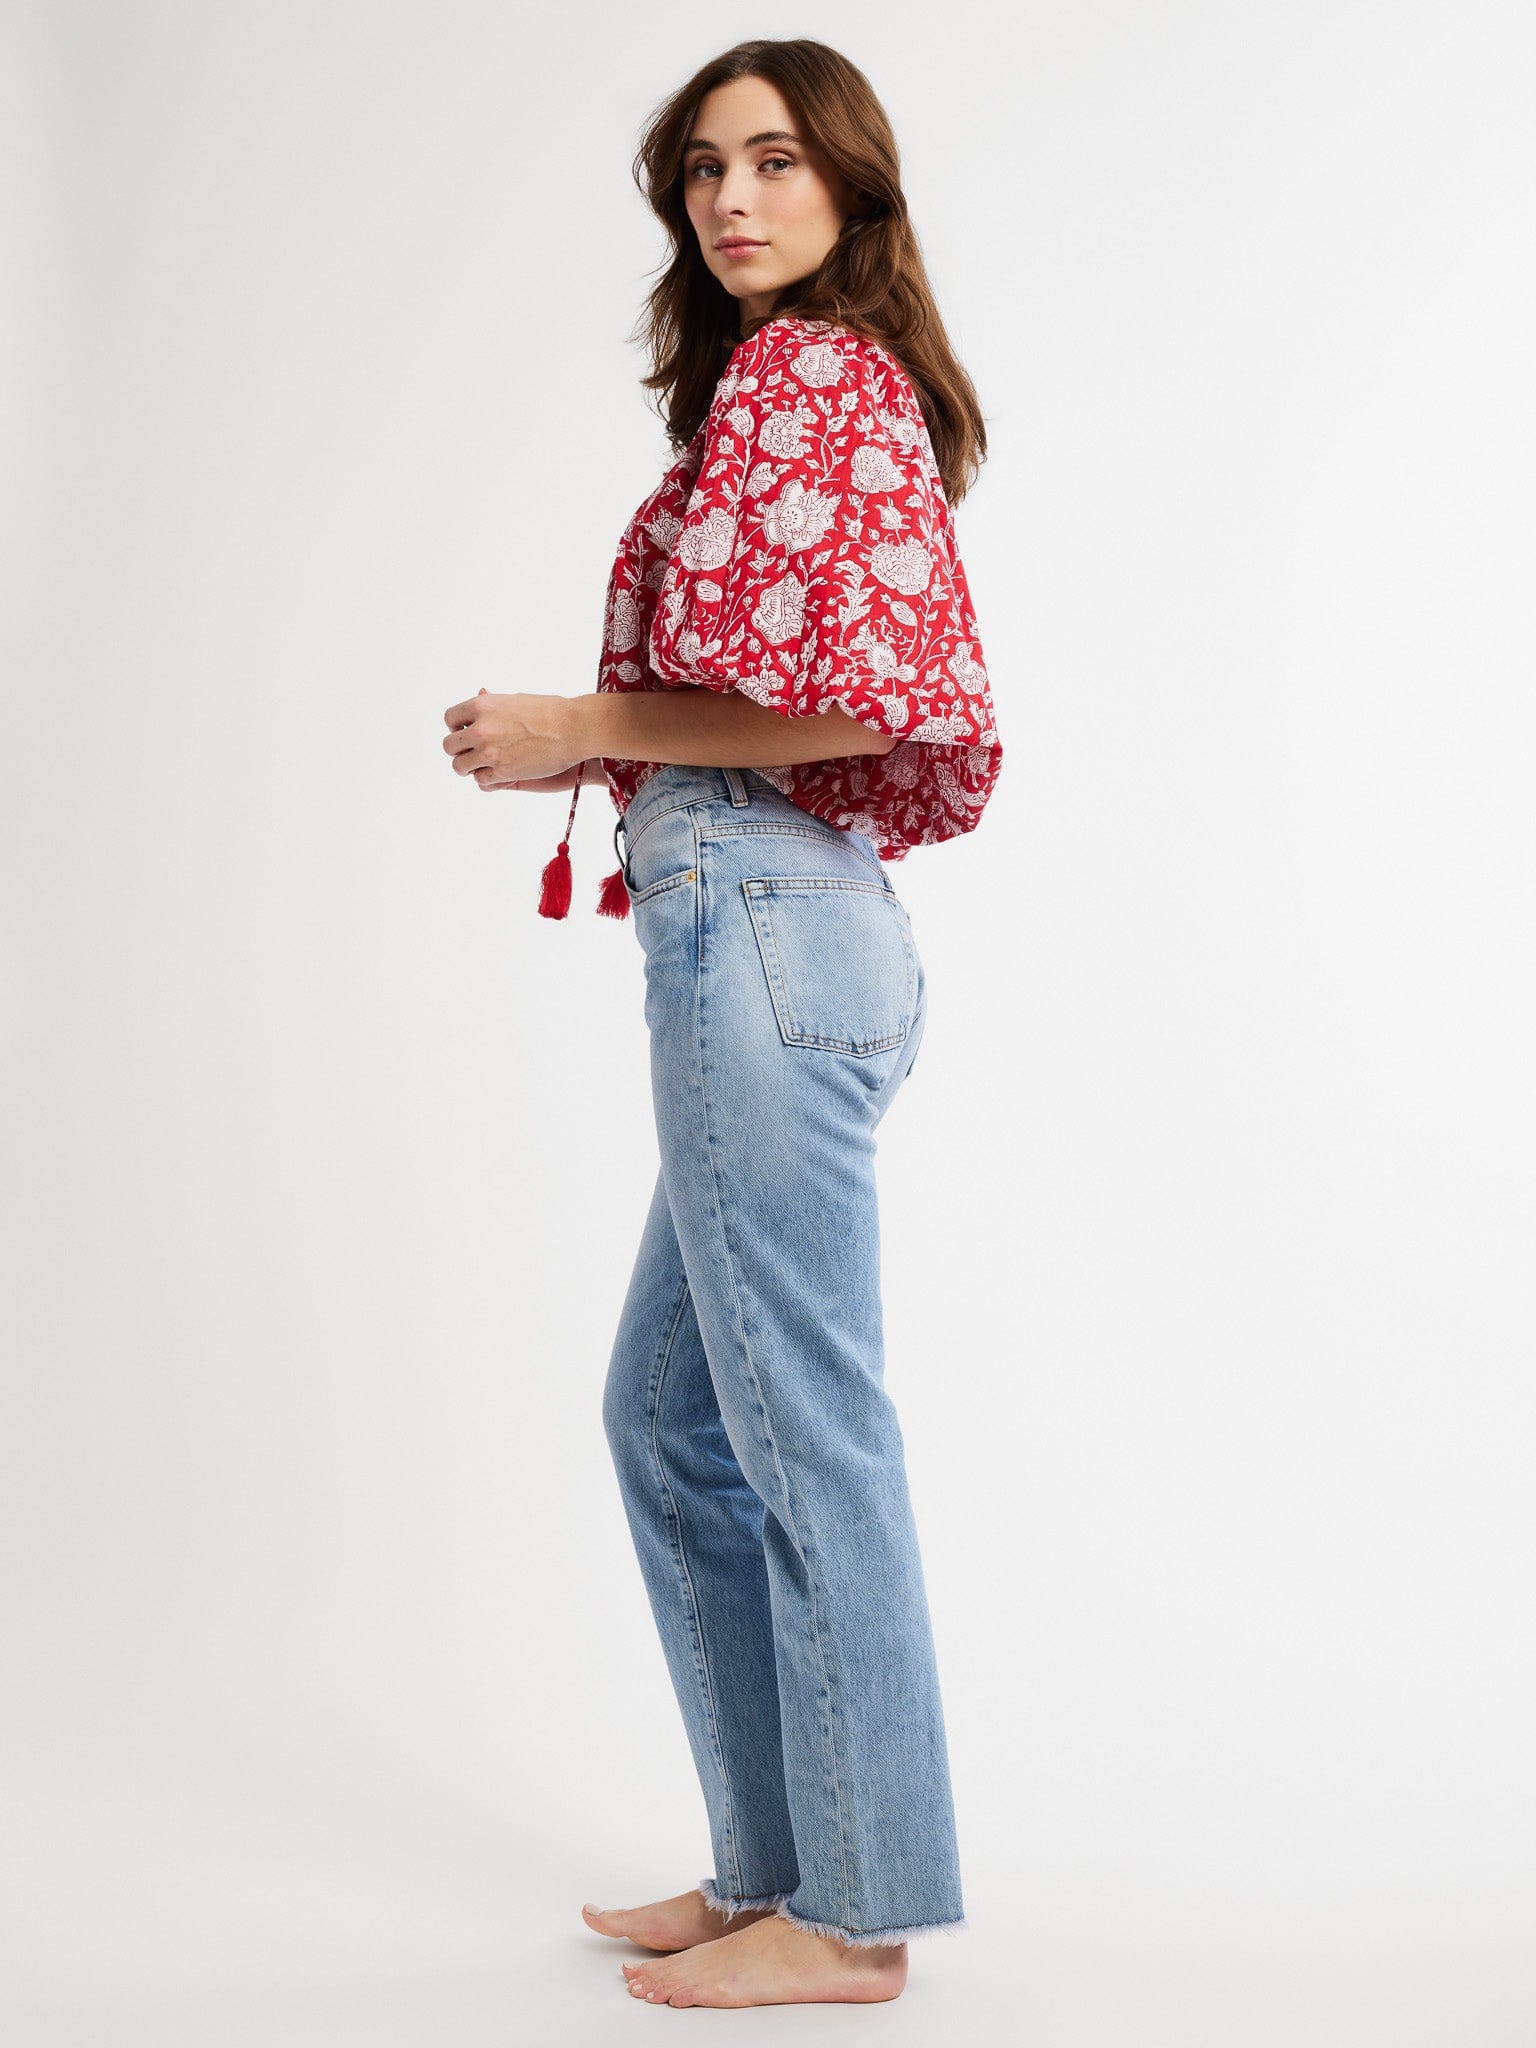 MILLE Clothing Charlie Top in Red Zinnia